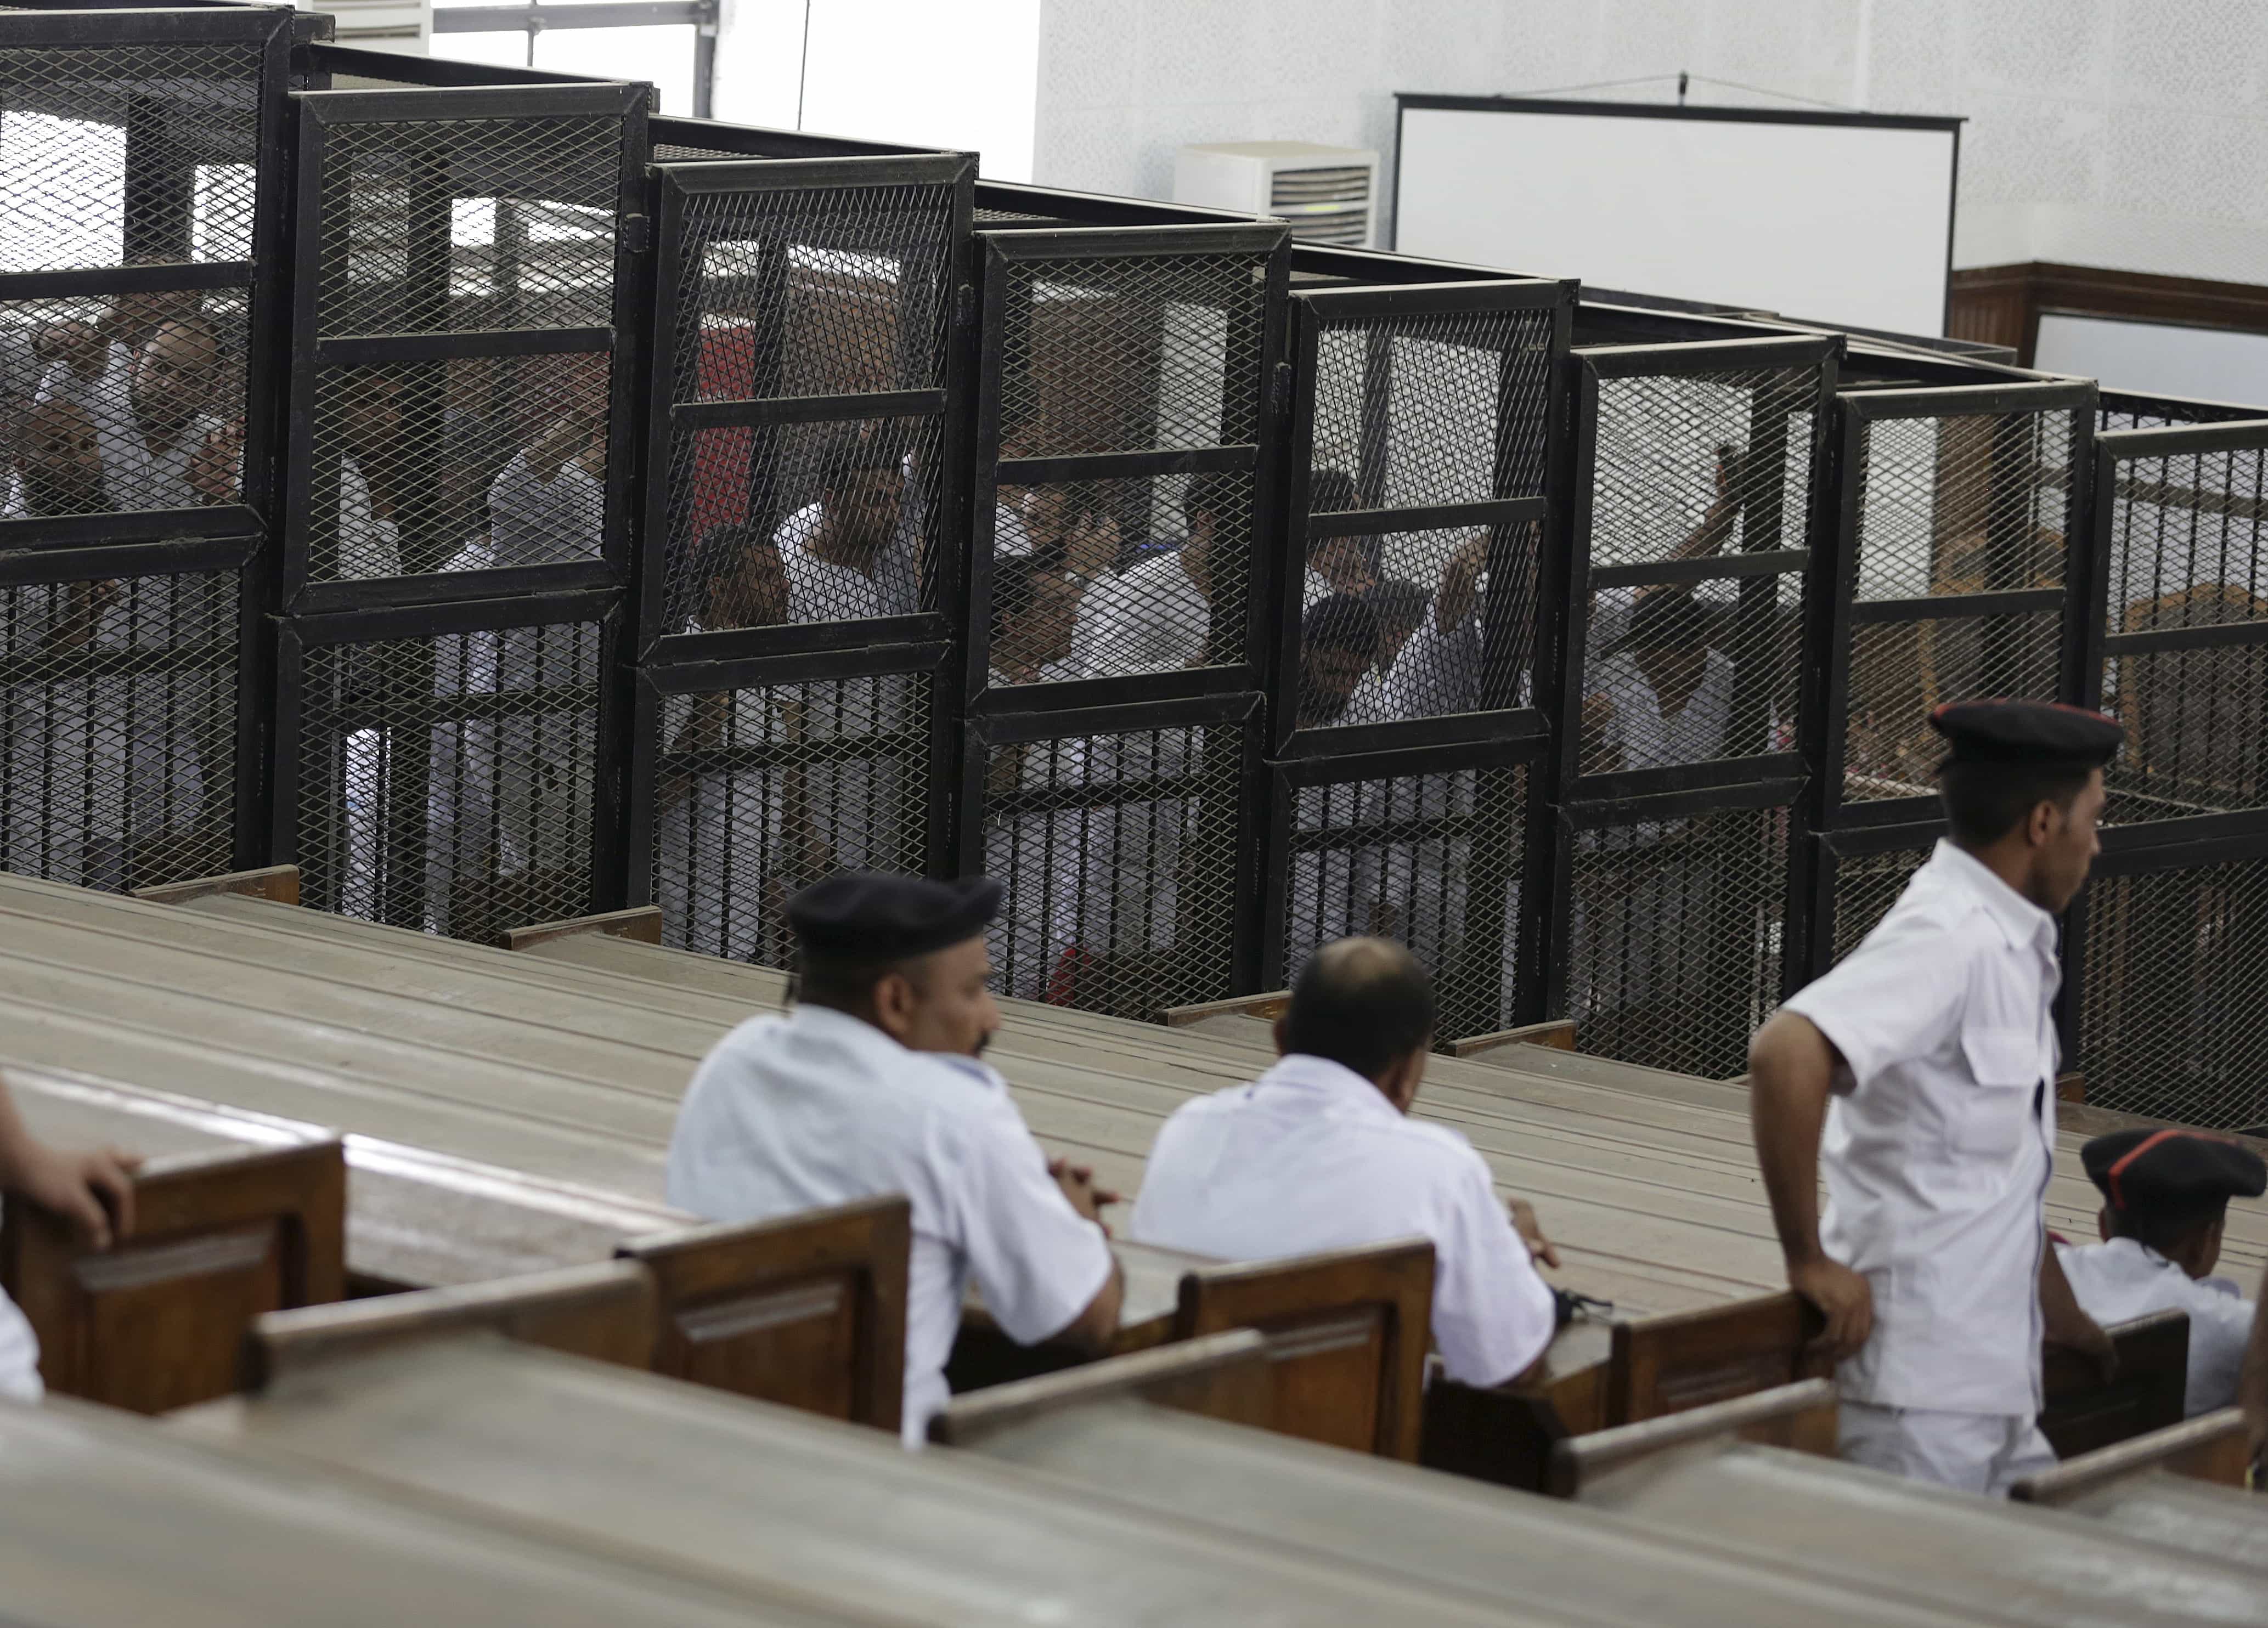 Suhayb Saad, an activist who rights groups say was taken by security forces and forced to confess on TV his membership of a terrorist cell, stands behind bars with other co-defendants as they wait for the ruling at a court in Cairo June 23, 2014, REUTERS/Asmaa Waguih